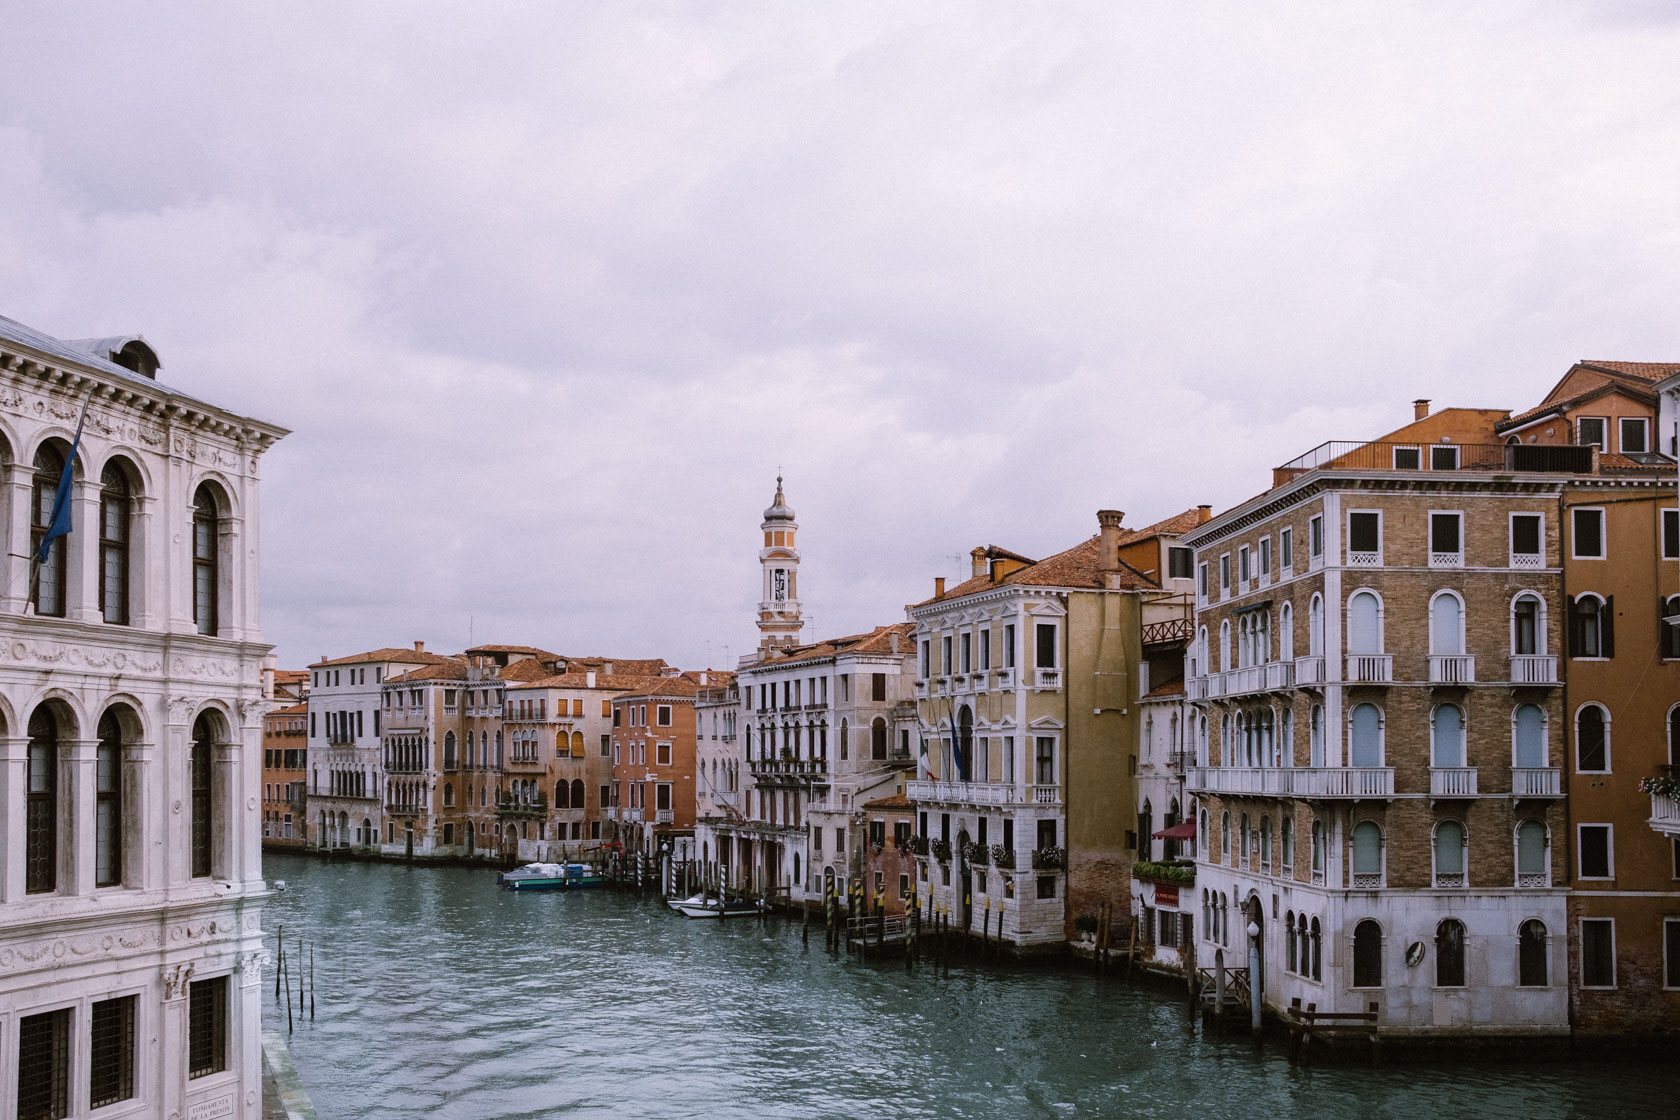 Venice's grand canal